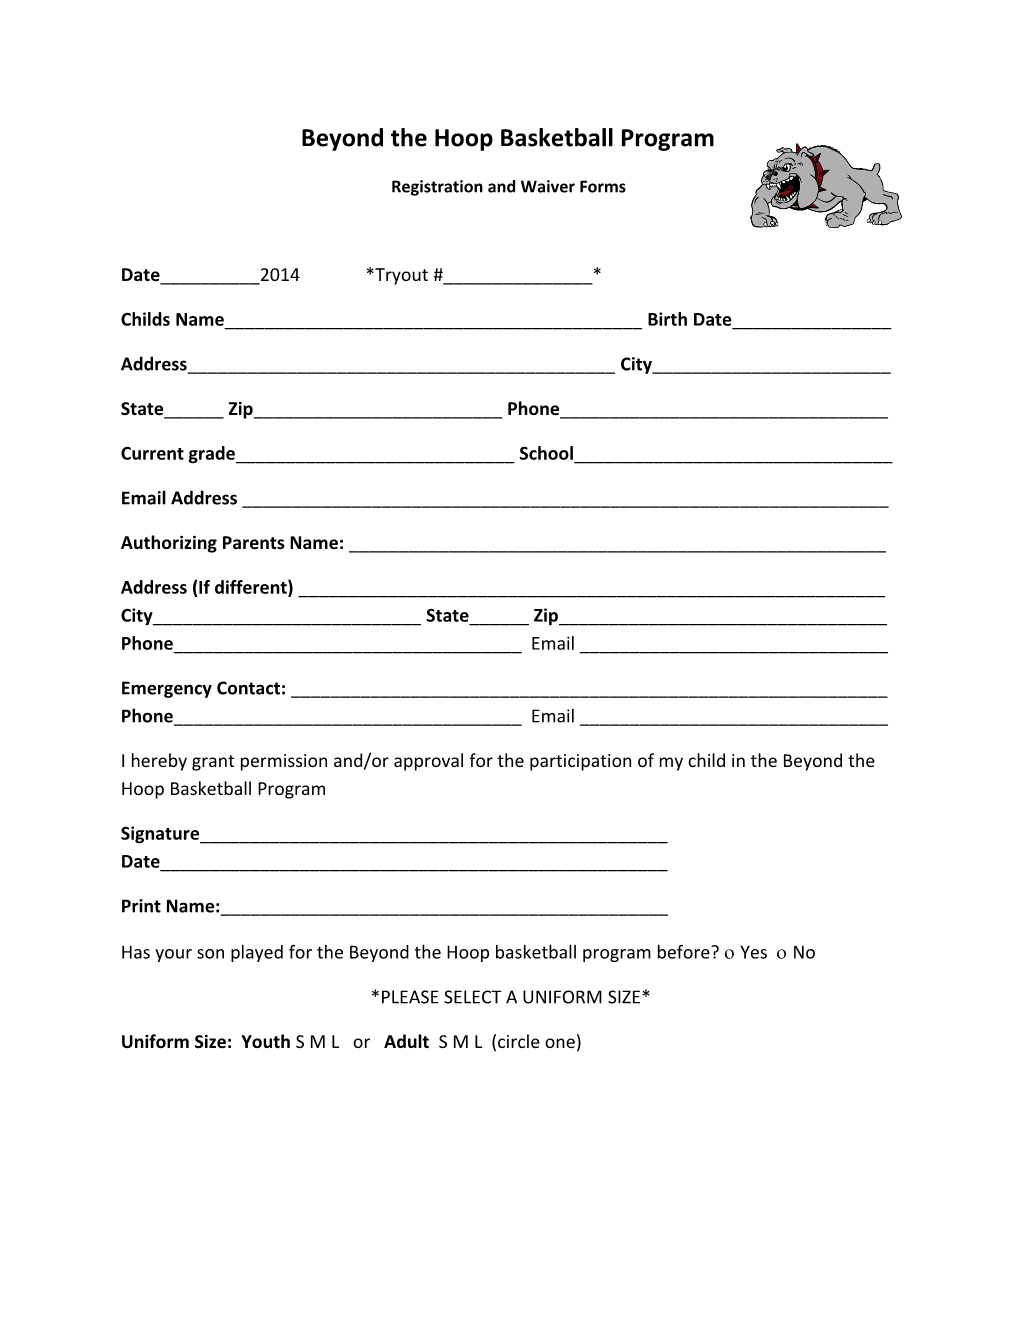 Registration and Waiver Forms